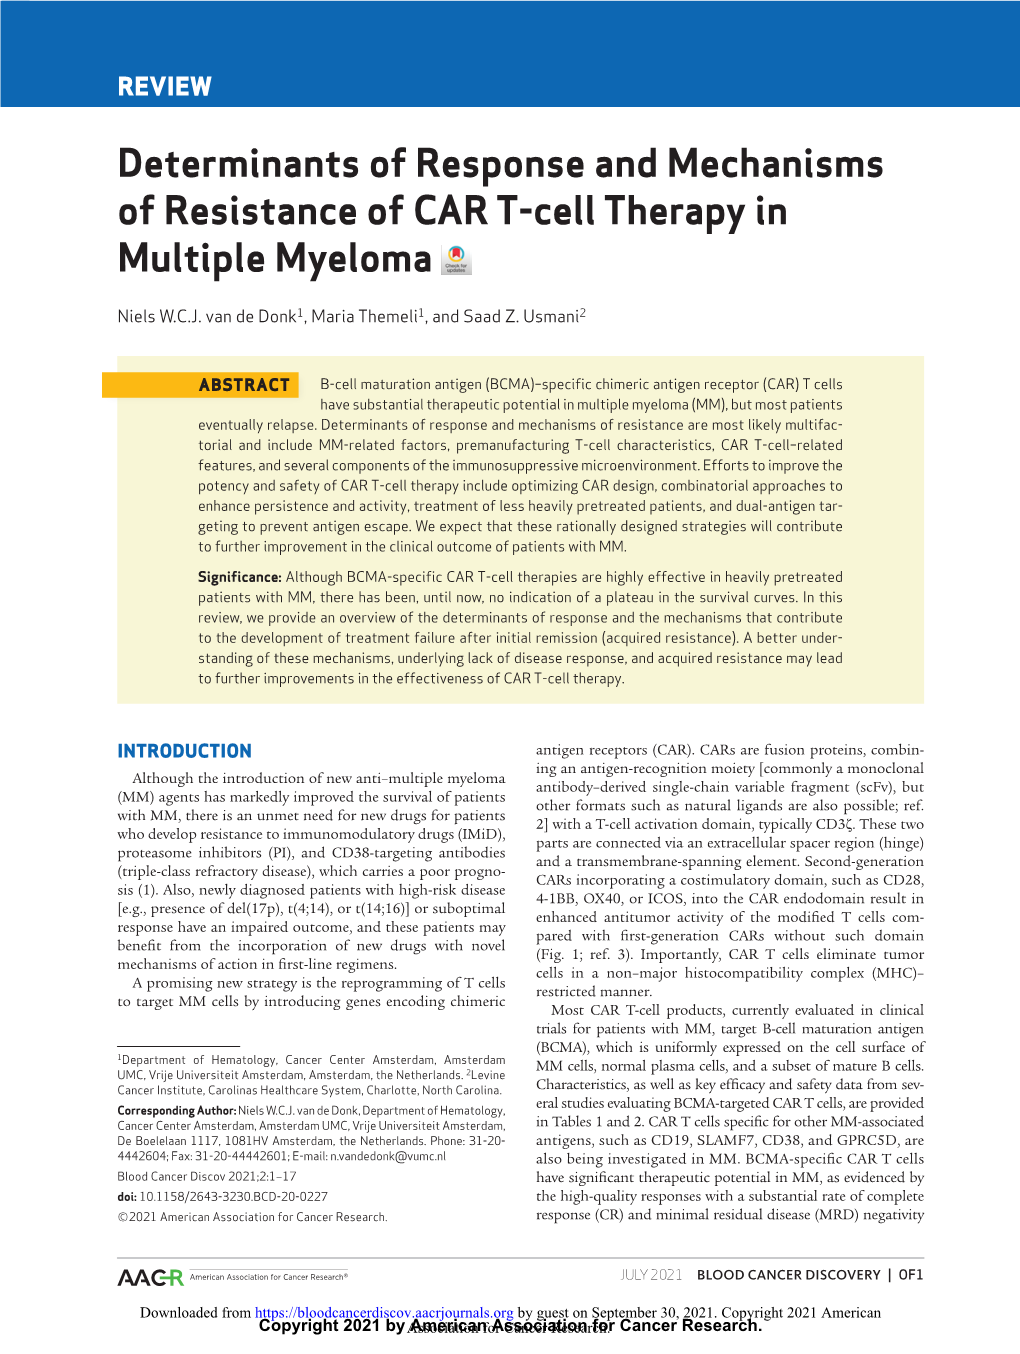 Determinants of Response and Mechanisms of Resistance of CAR T-Cell Therapy in Multiple Myeloma